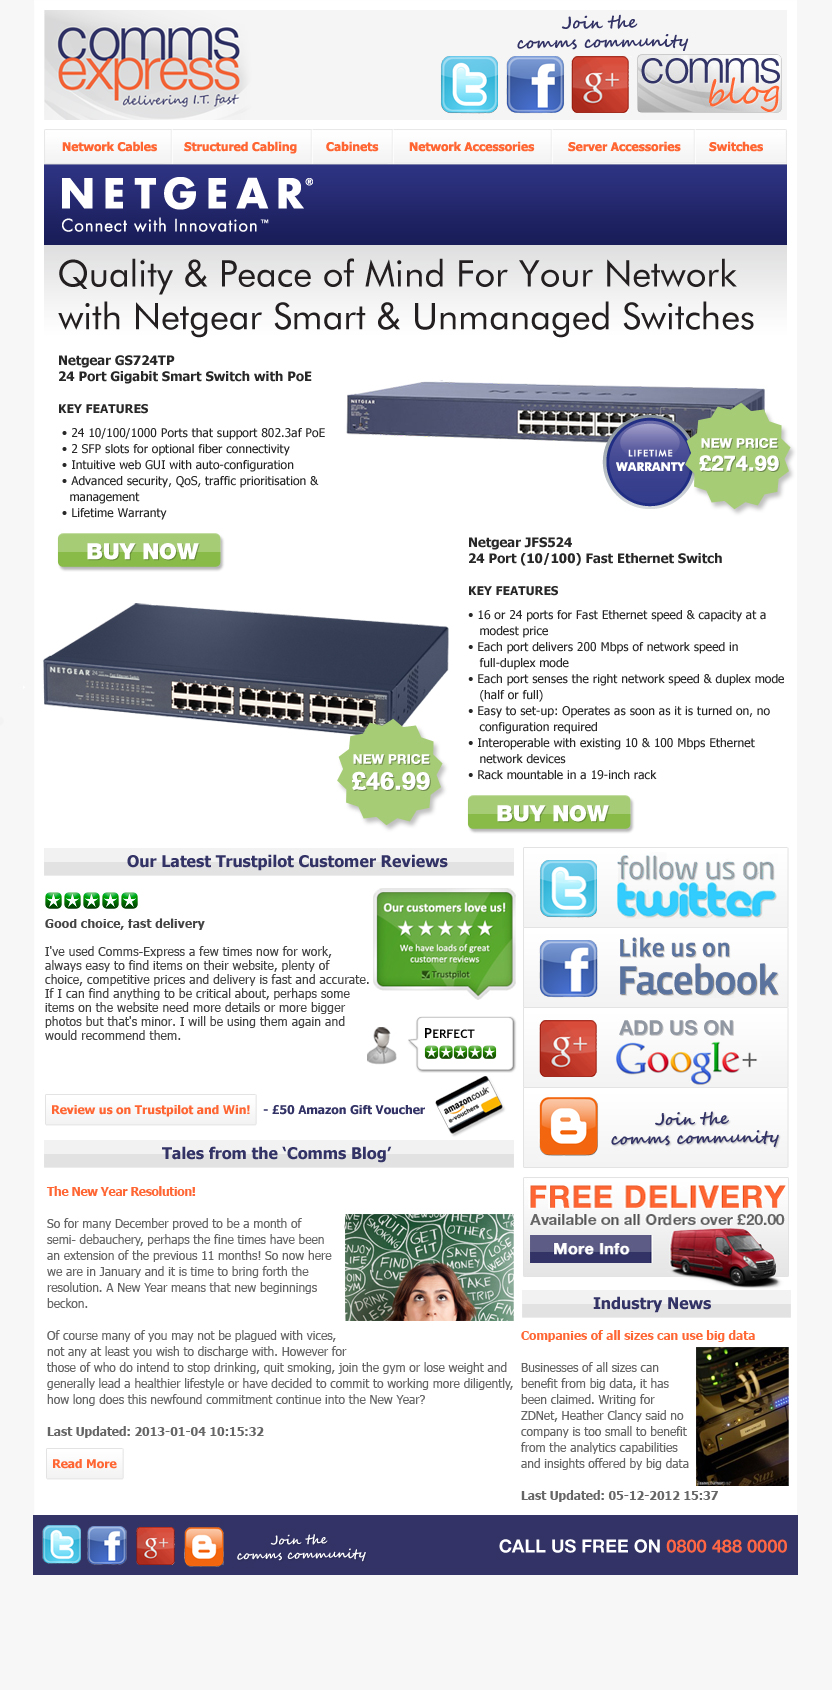 Quality Peace of Mind For Your Network with Netgear Swi